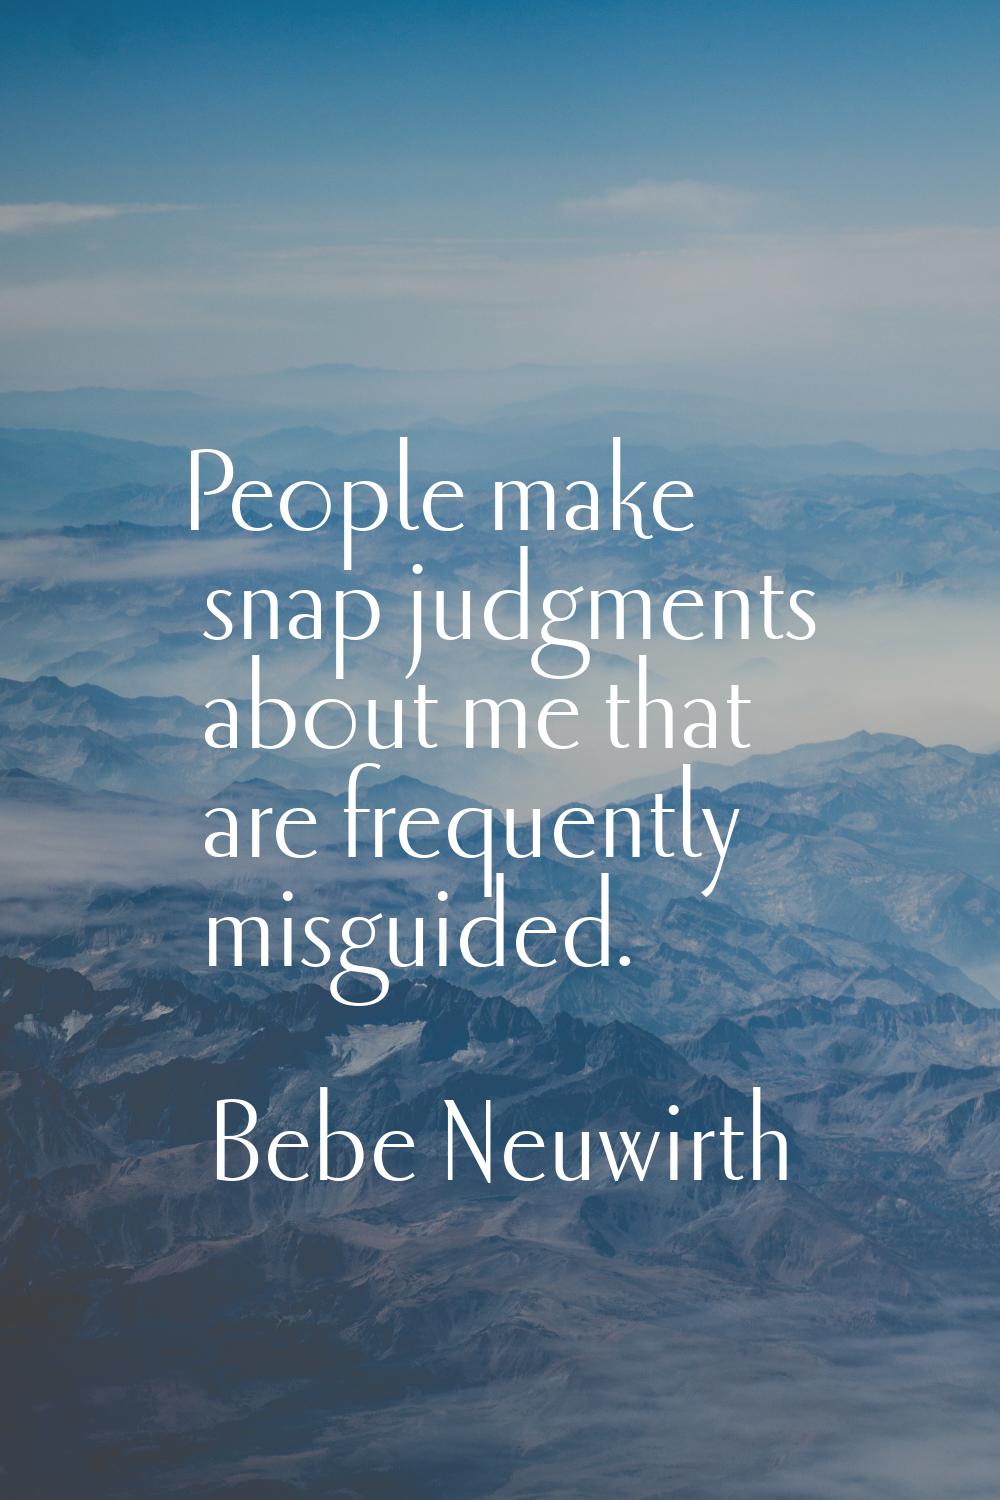 People make snap judgments about me that are frequently misguided.